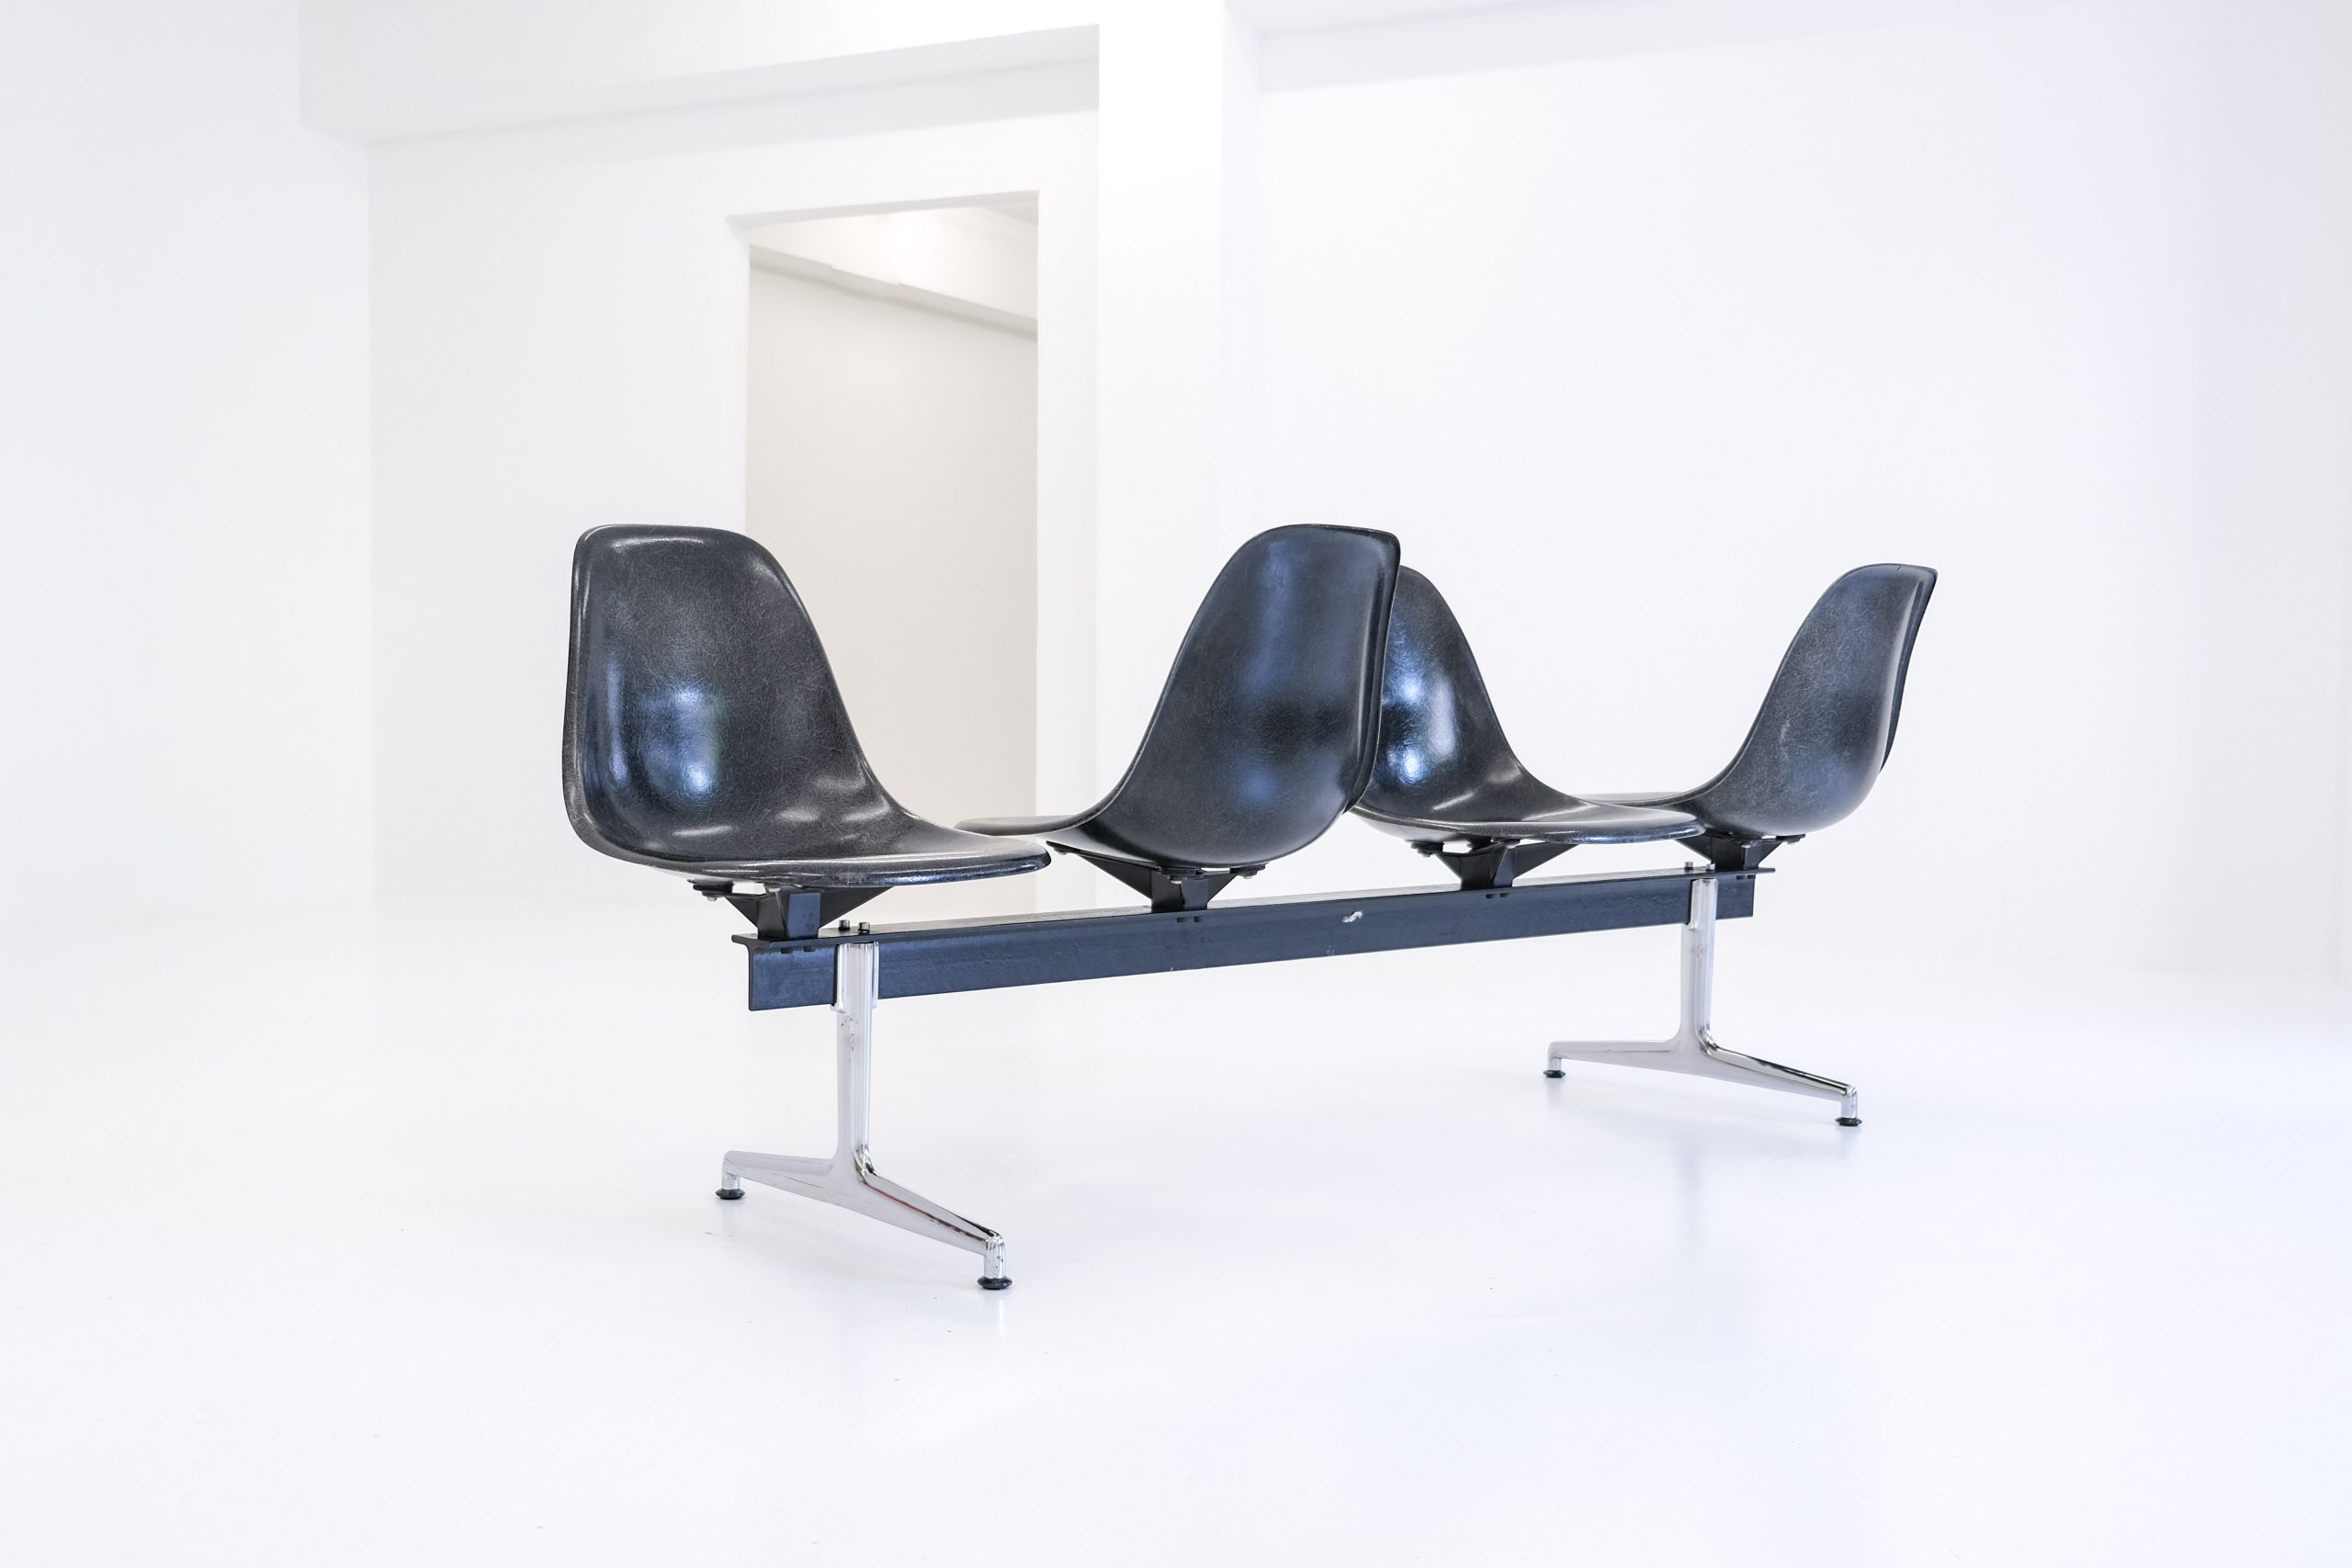 eames seating system, ray eames, charles eames, herman miller